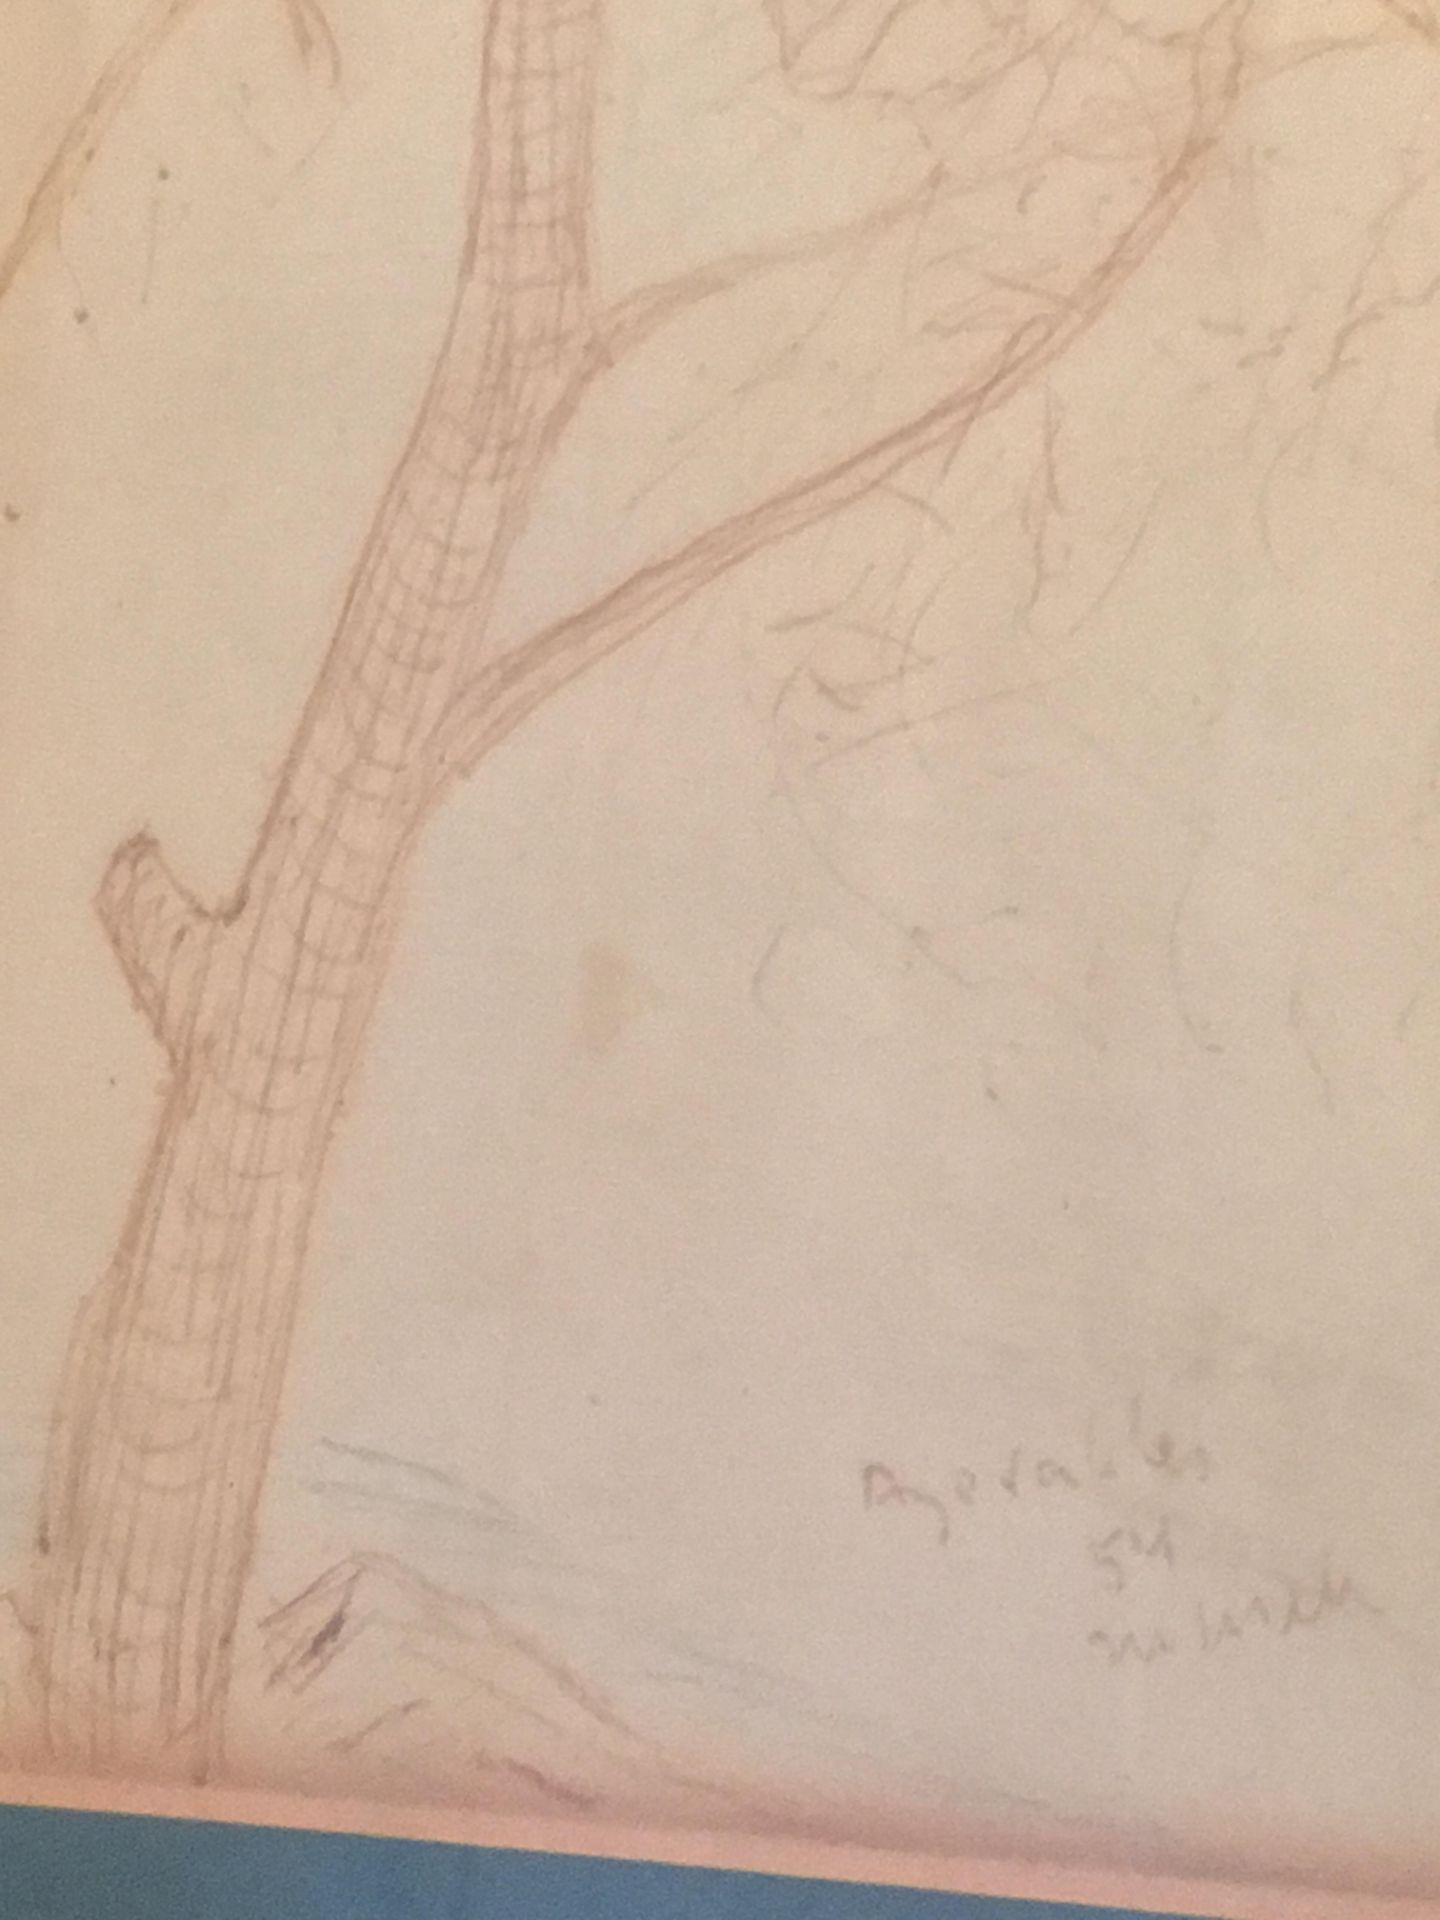 Red Tree signed by Marek Szwarc 1892-1958 - Image 2 of 2